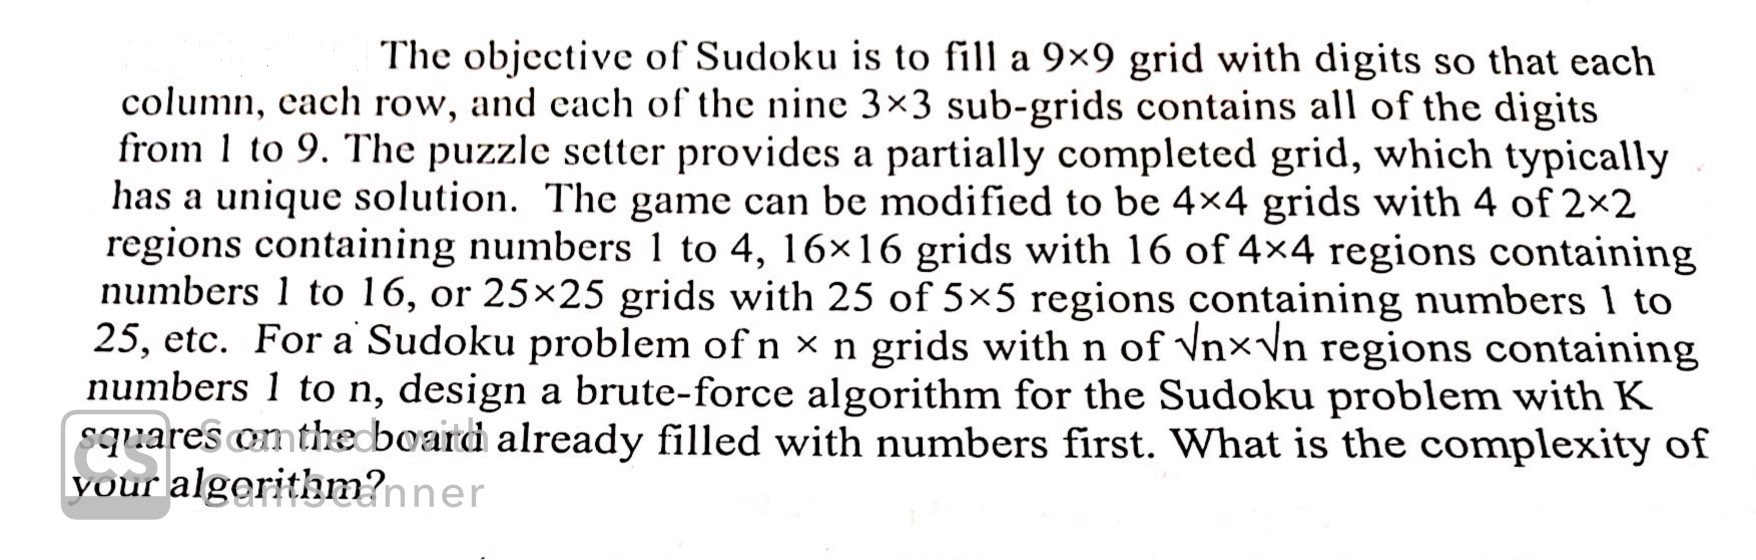 The objective of Sudoku is to fill a 9x9 grid with digits so that each column, each row, and each of the nine 3x3 sub-grids c